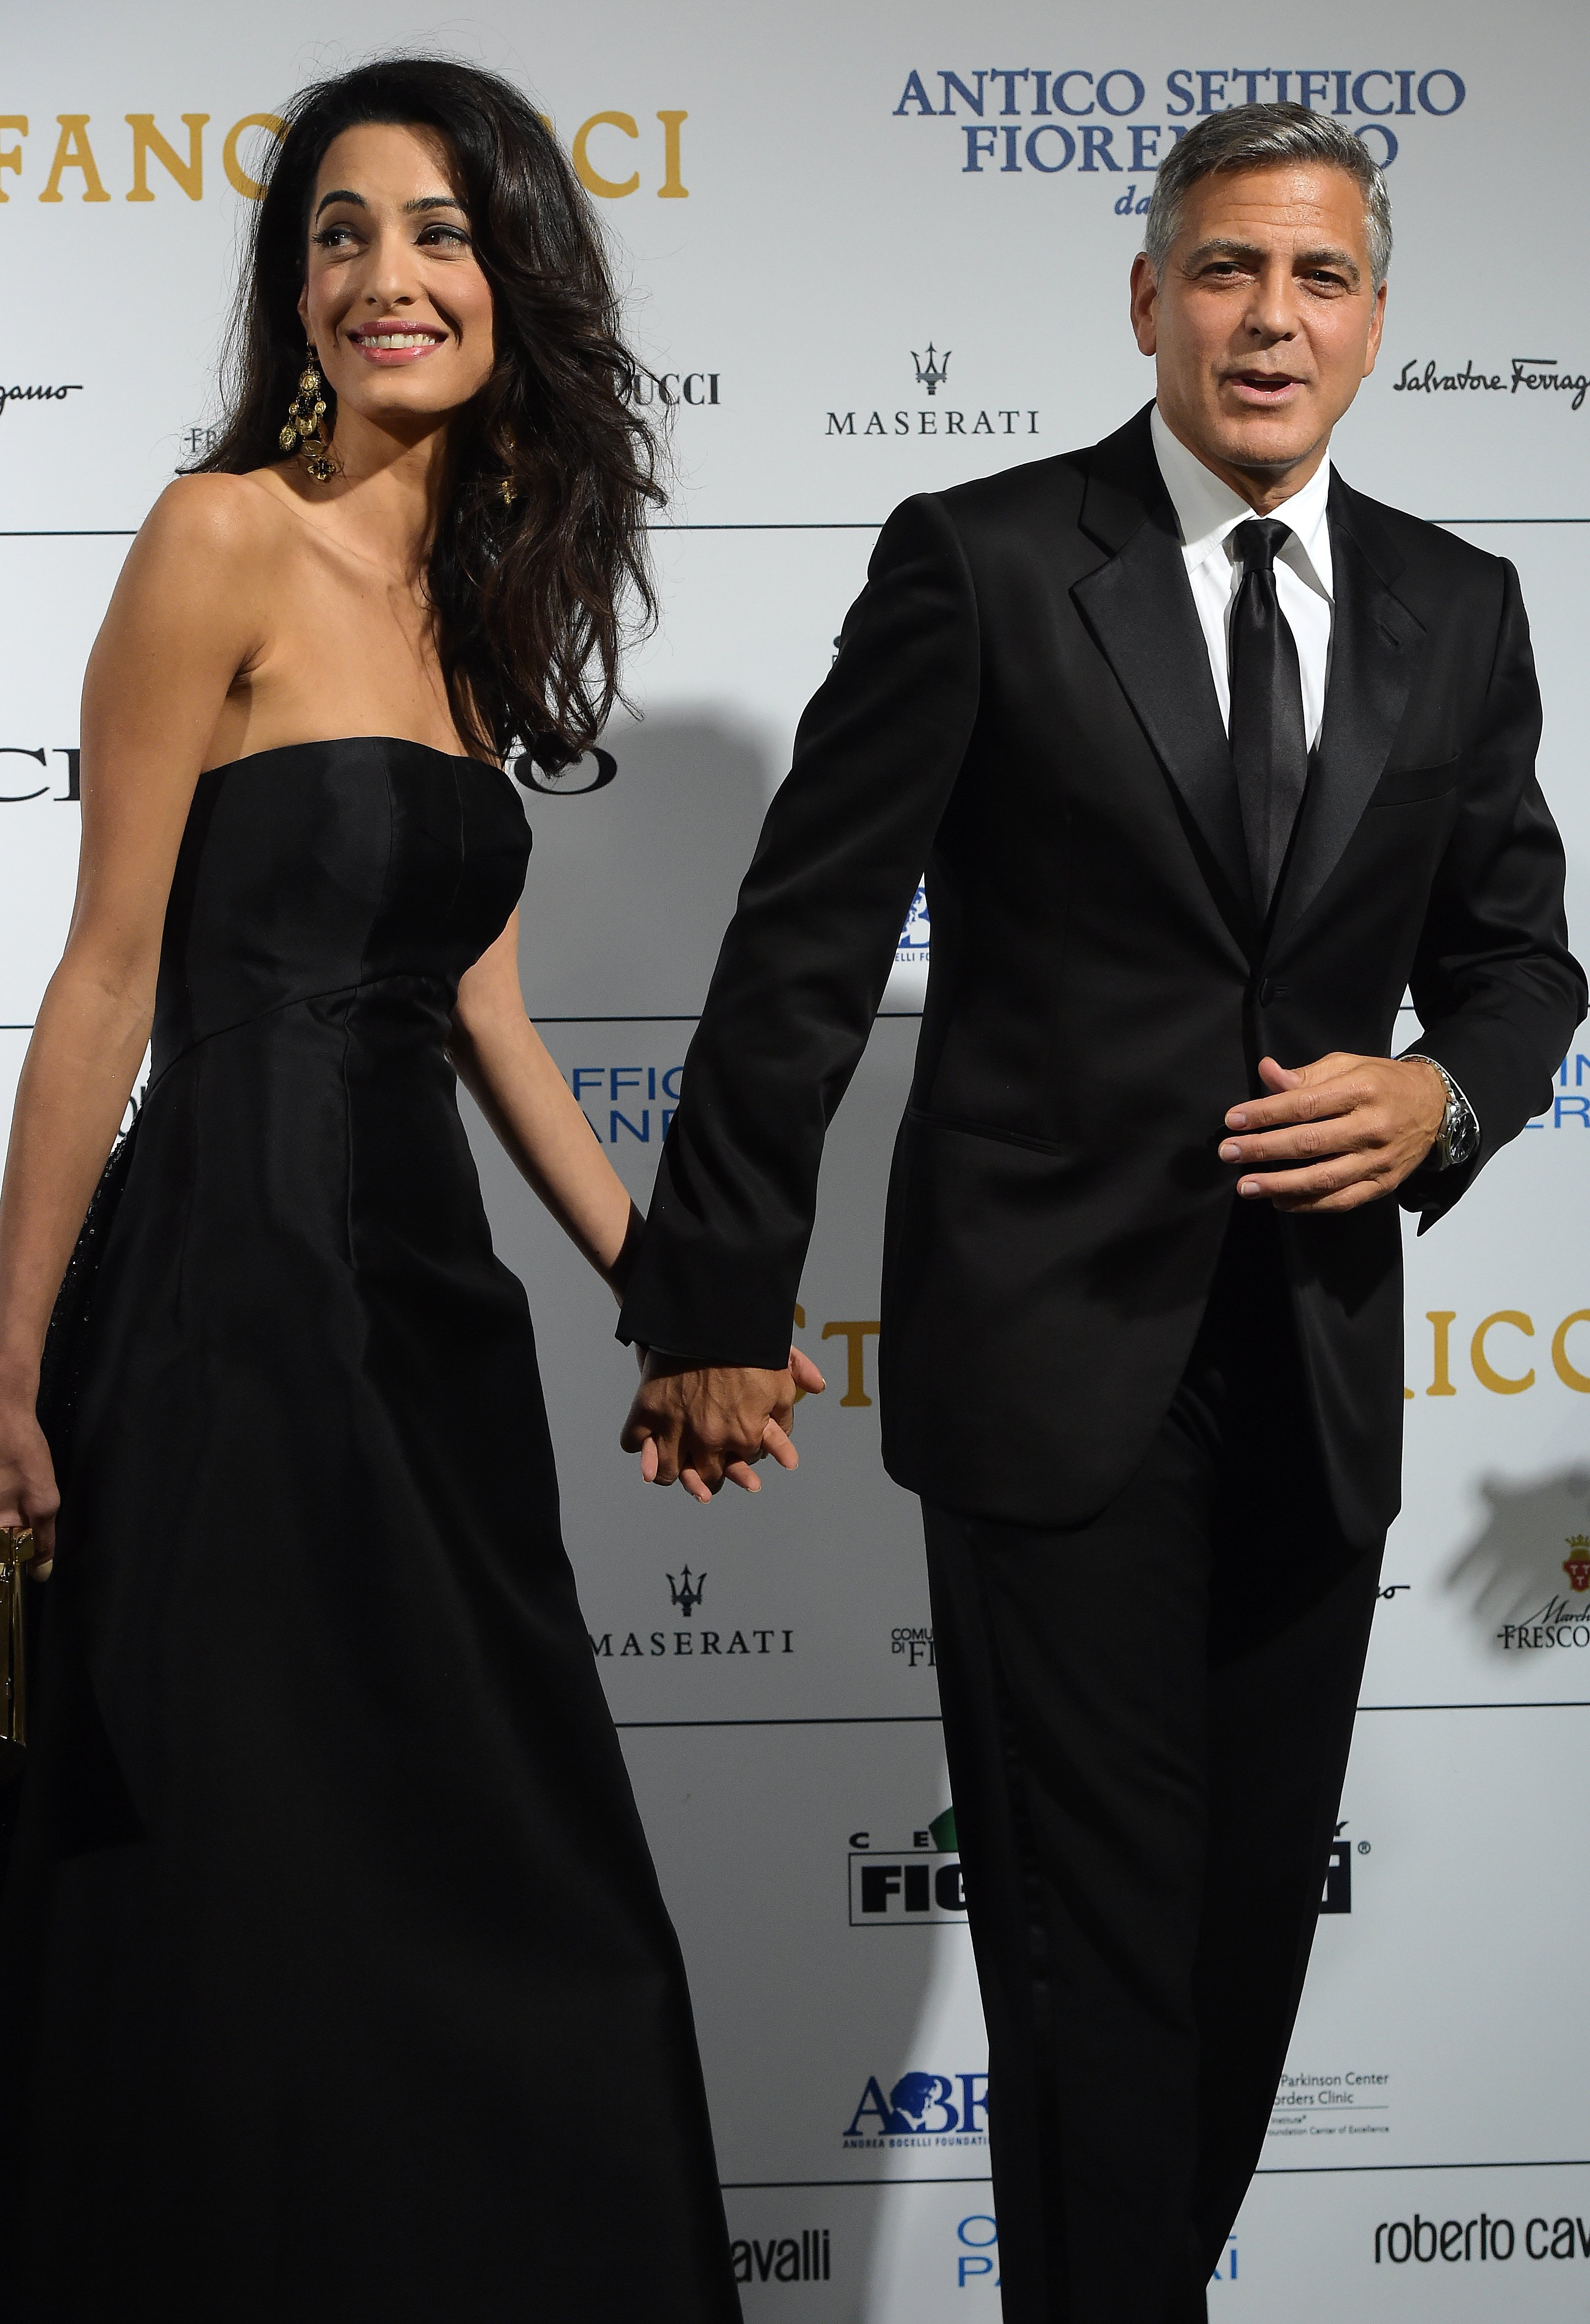 George Clooney and his fiancee Amal Alamuddin arriving at the Palazzo Vecchio to attend the "Celebrity Fight Night" gala event on September 7, 2014 in Florence, Italy. / Source: Getty Images